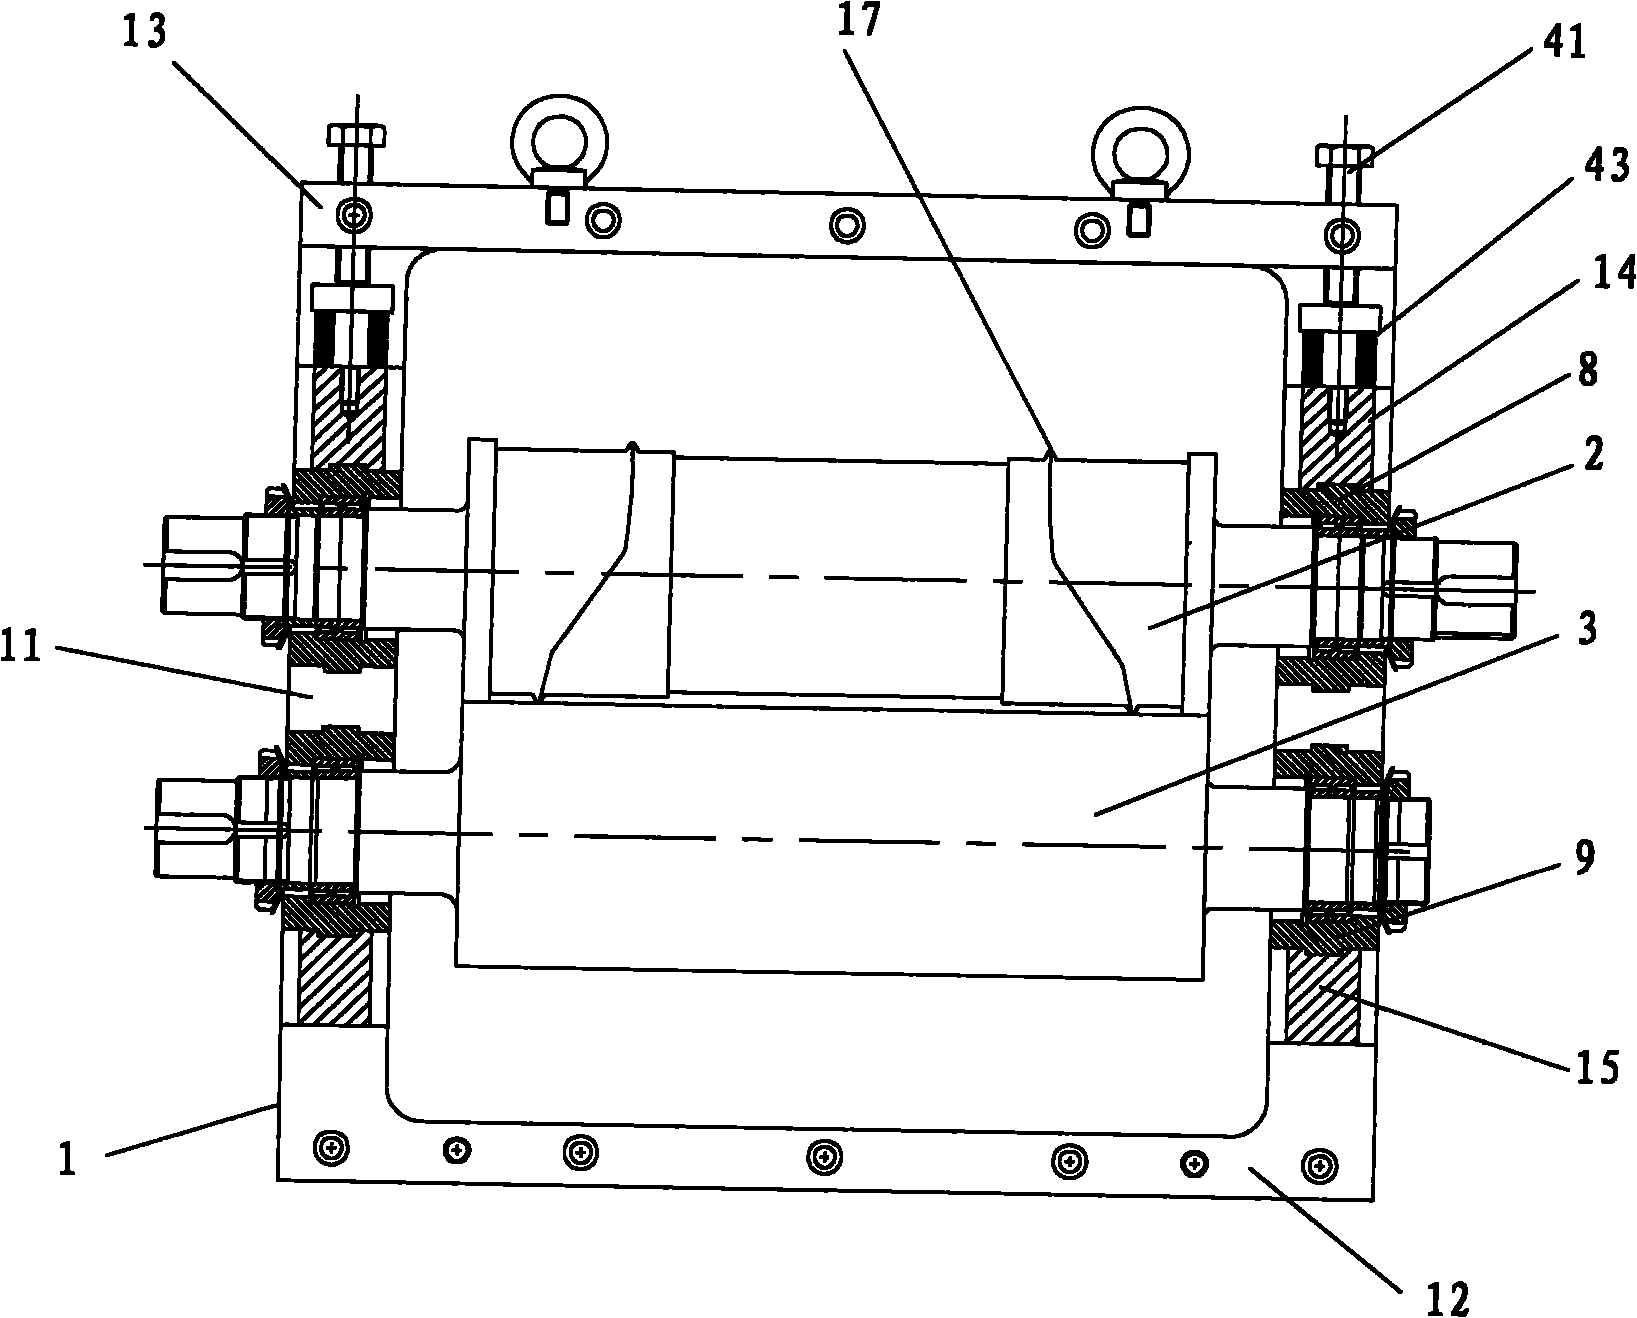 Rotating die cutting device